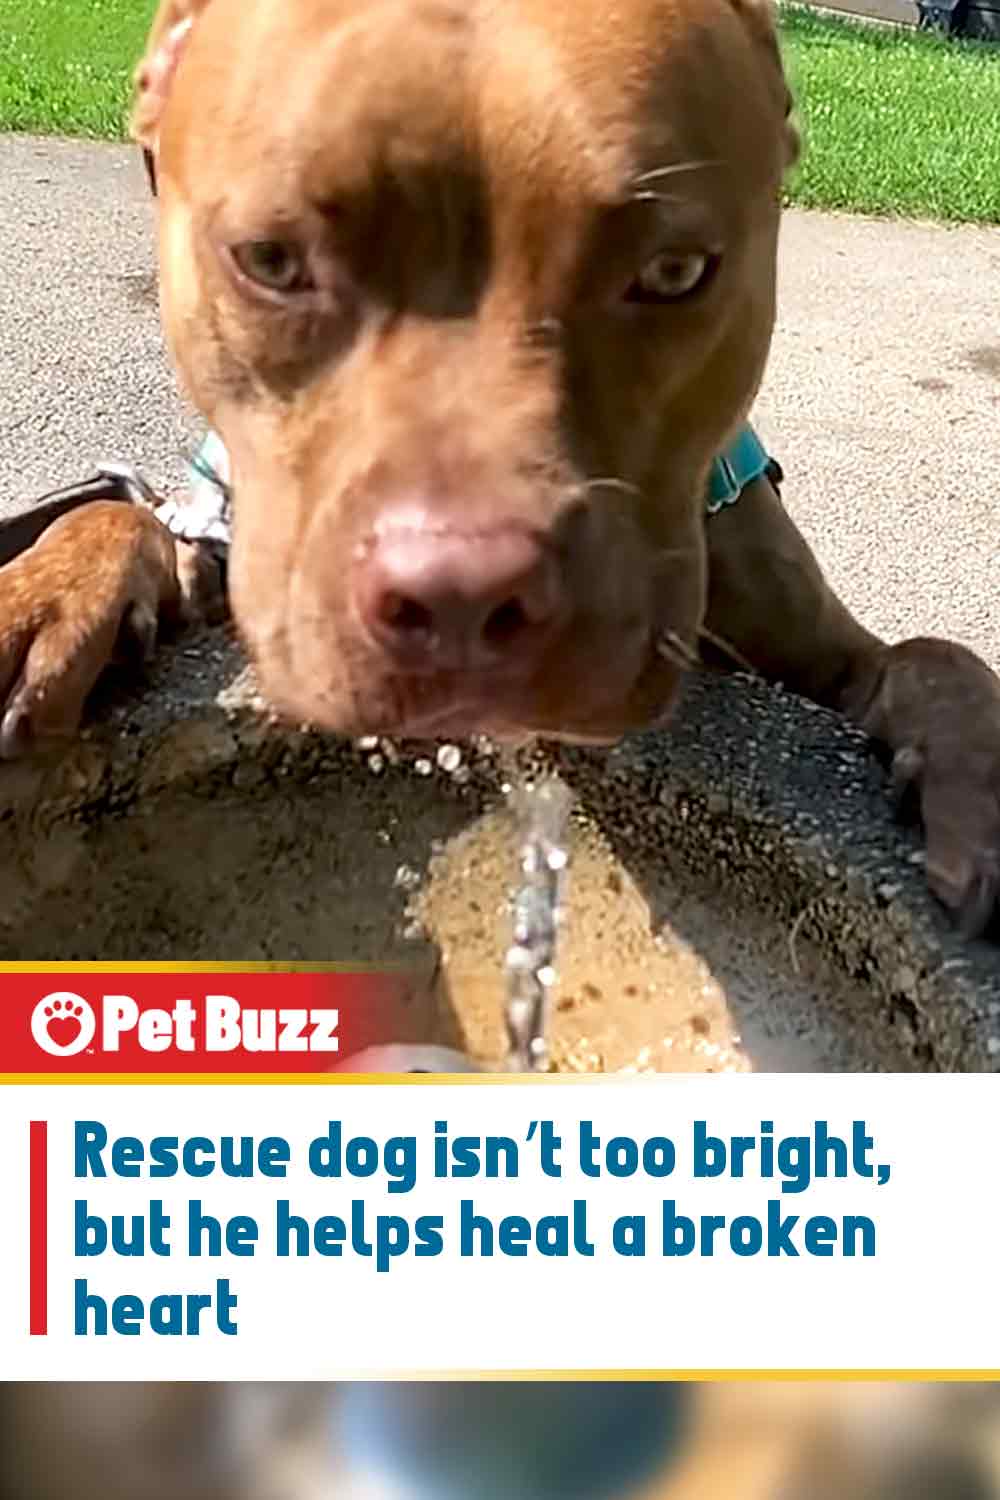 Rescue dog isn’t too bright, but he helps heal a broken heart